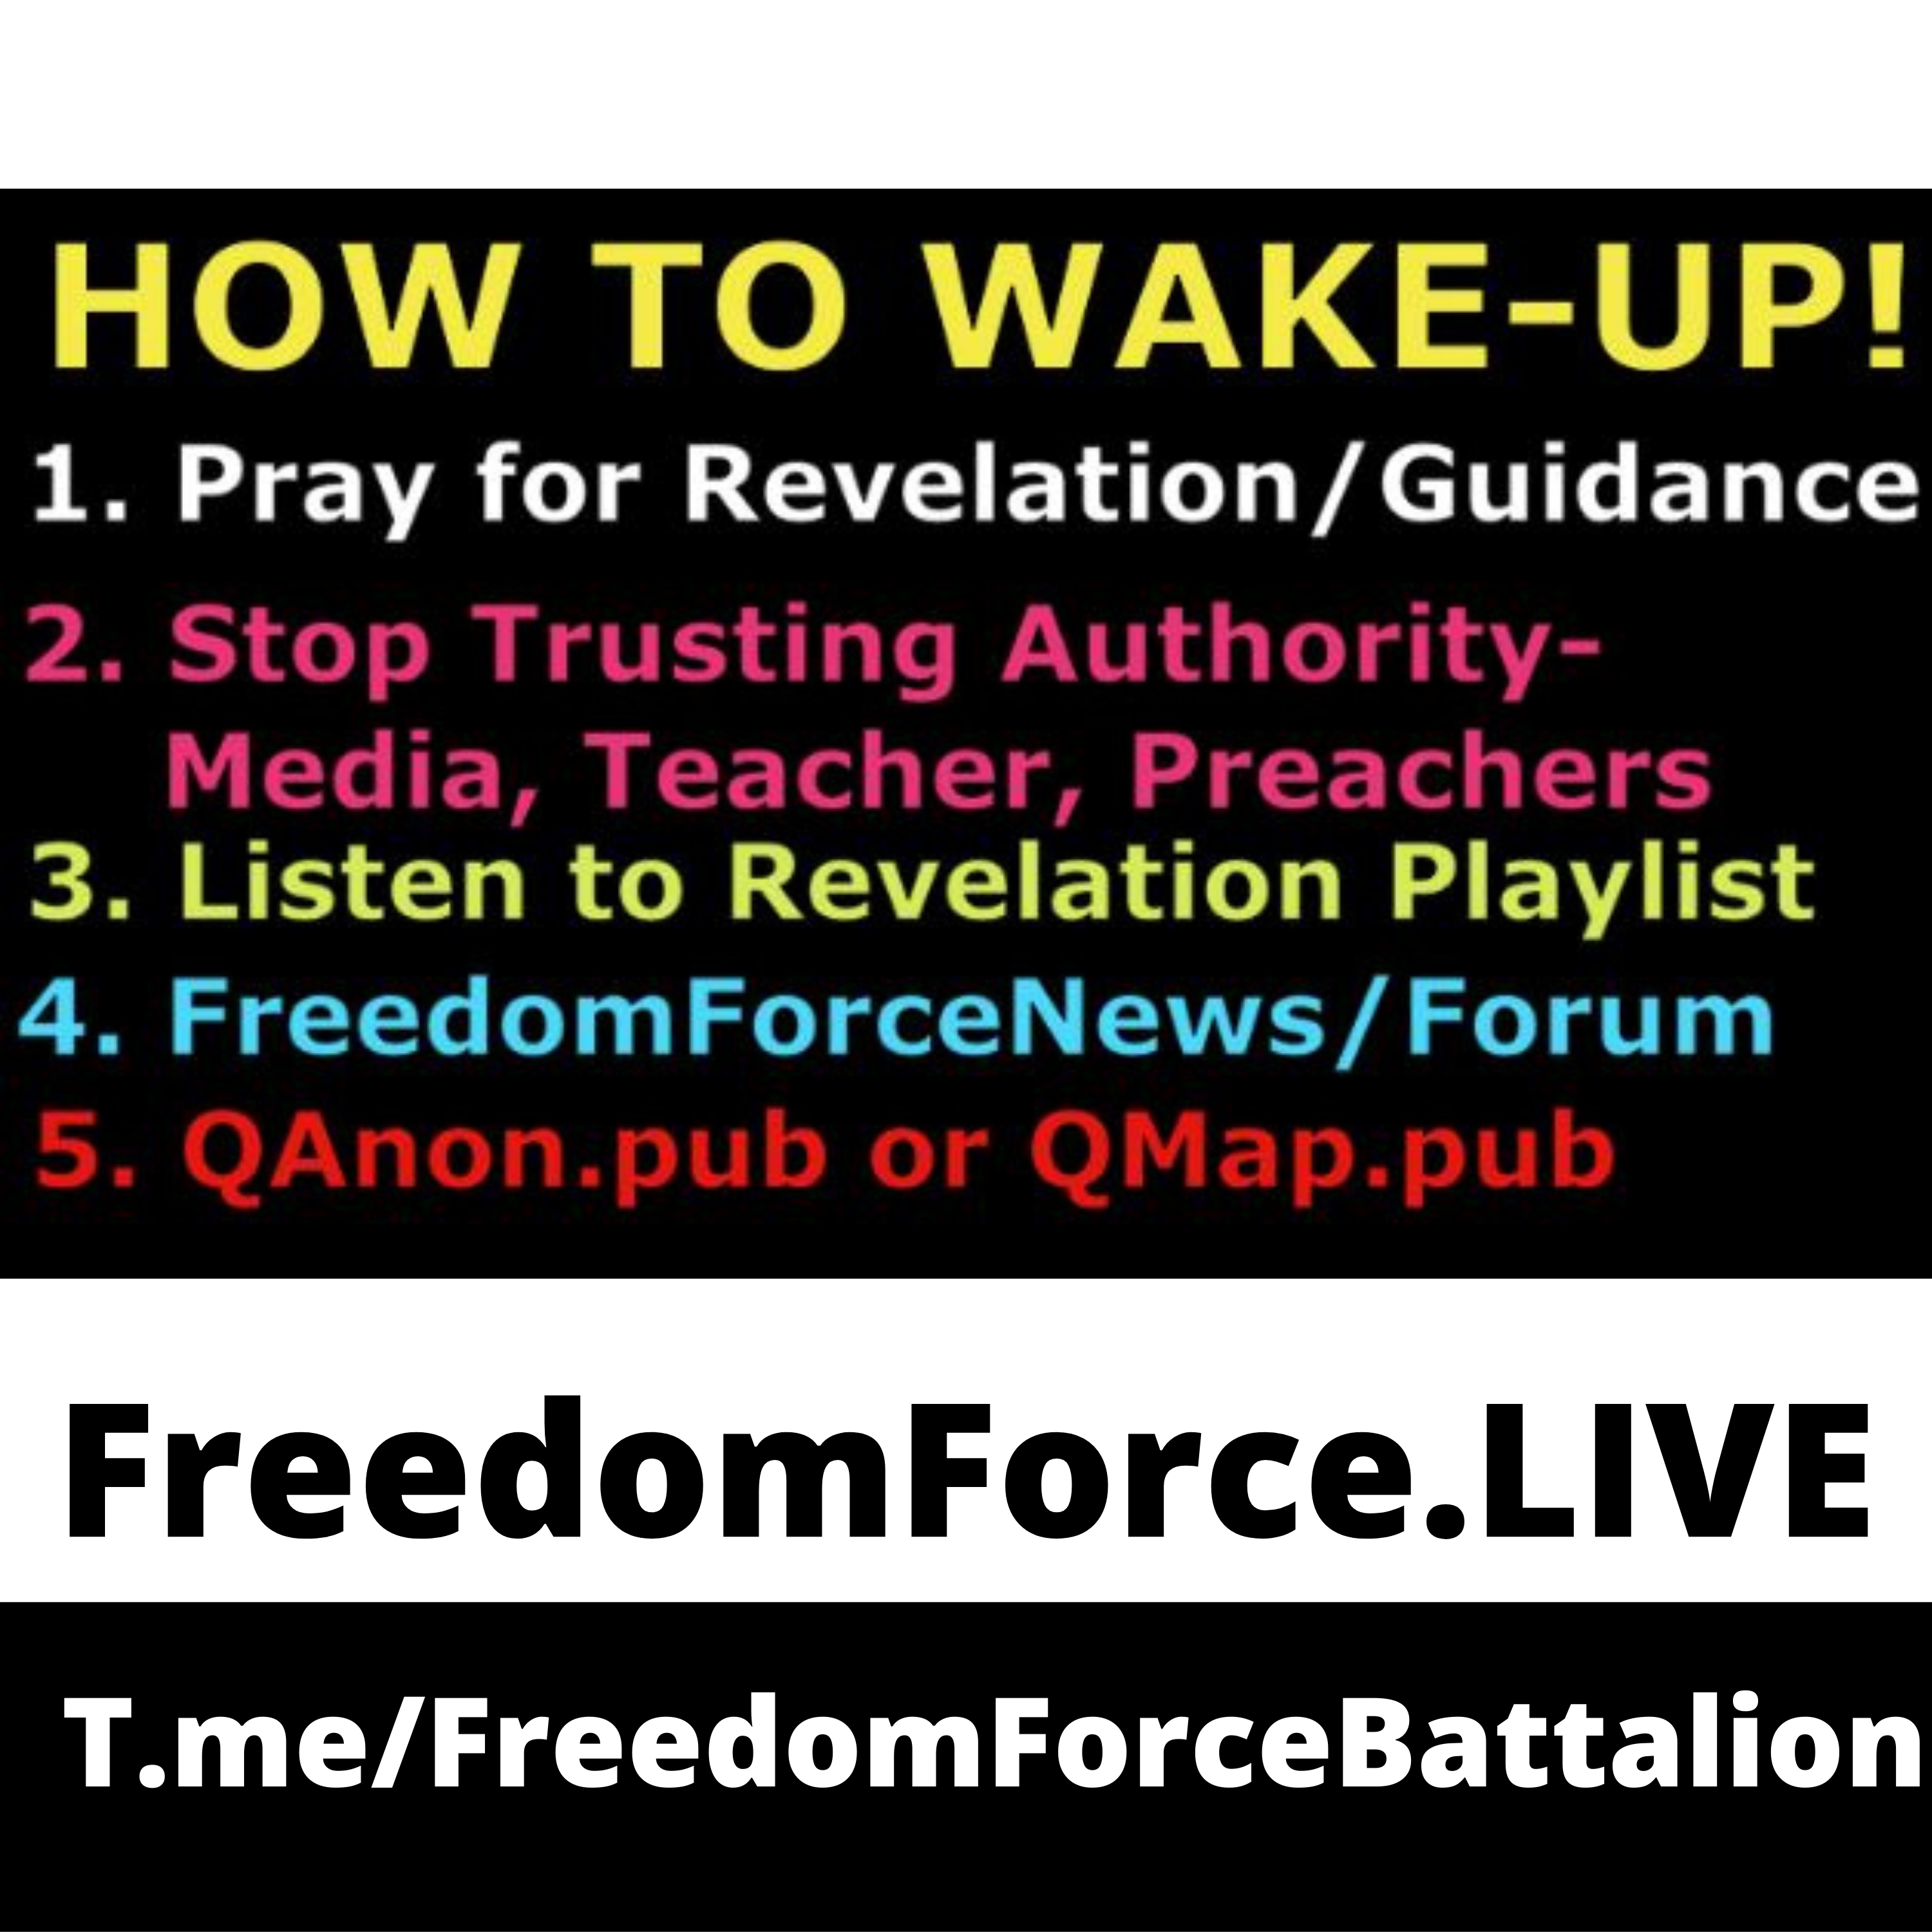 How to Wake Up! 9.13.19